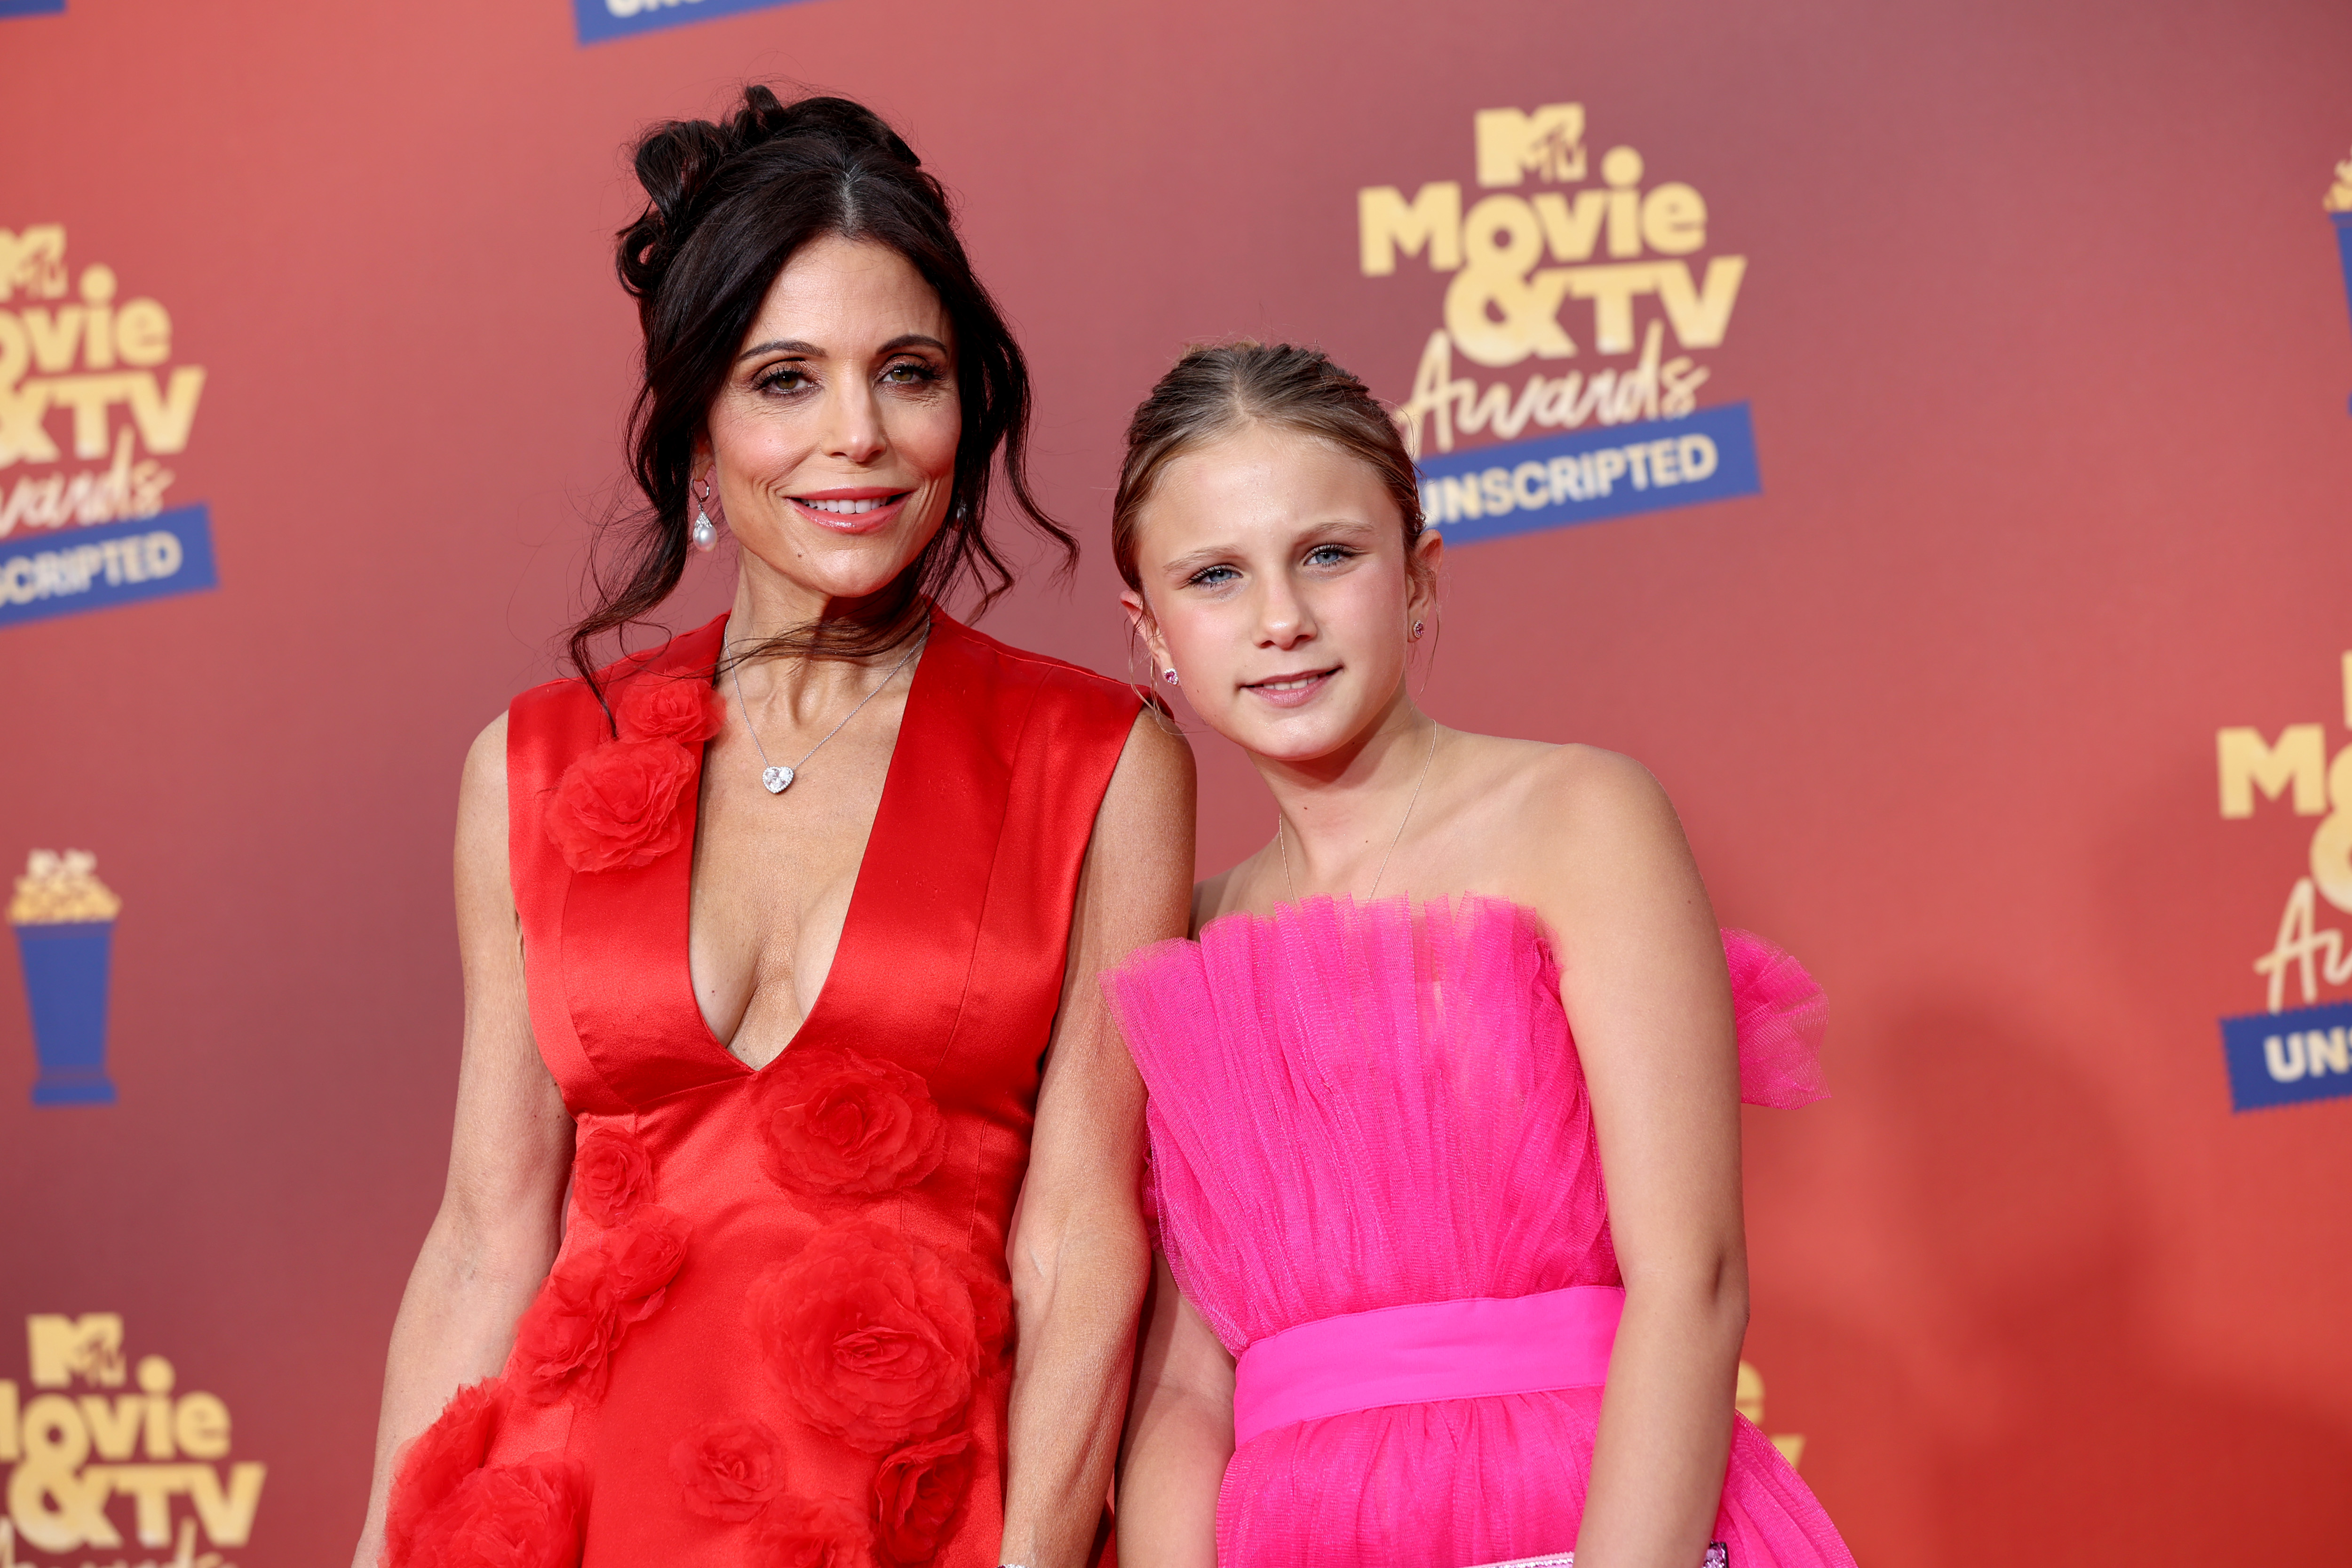 Bethenny Frankel and Bryn Hoppy at the MTV Movie & TV Awards: Unscripted at Barker Hangar in Santa Monica, CA, broadcasted on June 5, 2022. | Source: Getty Images